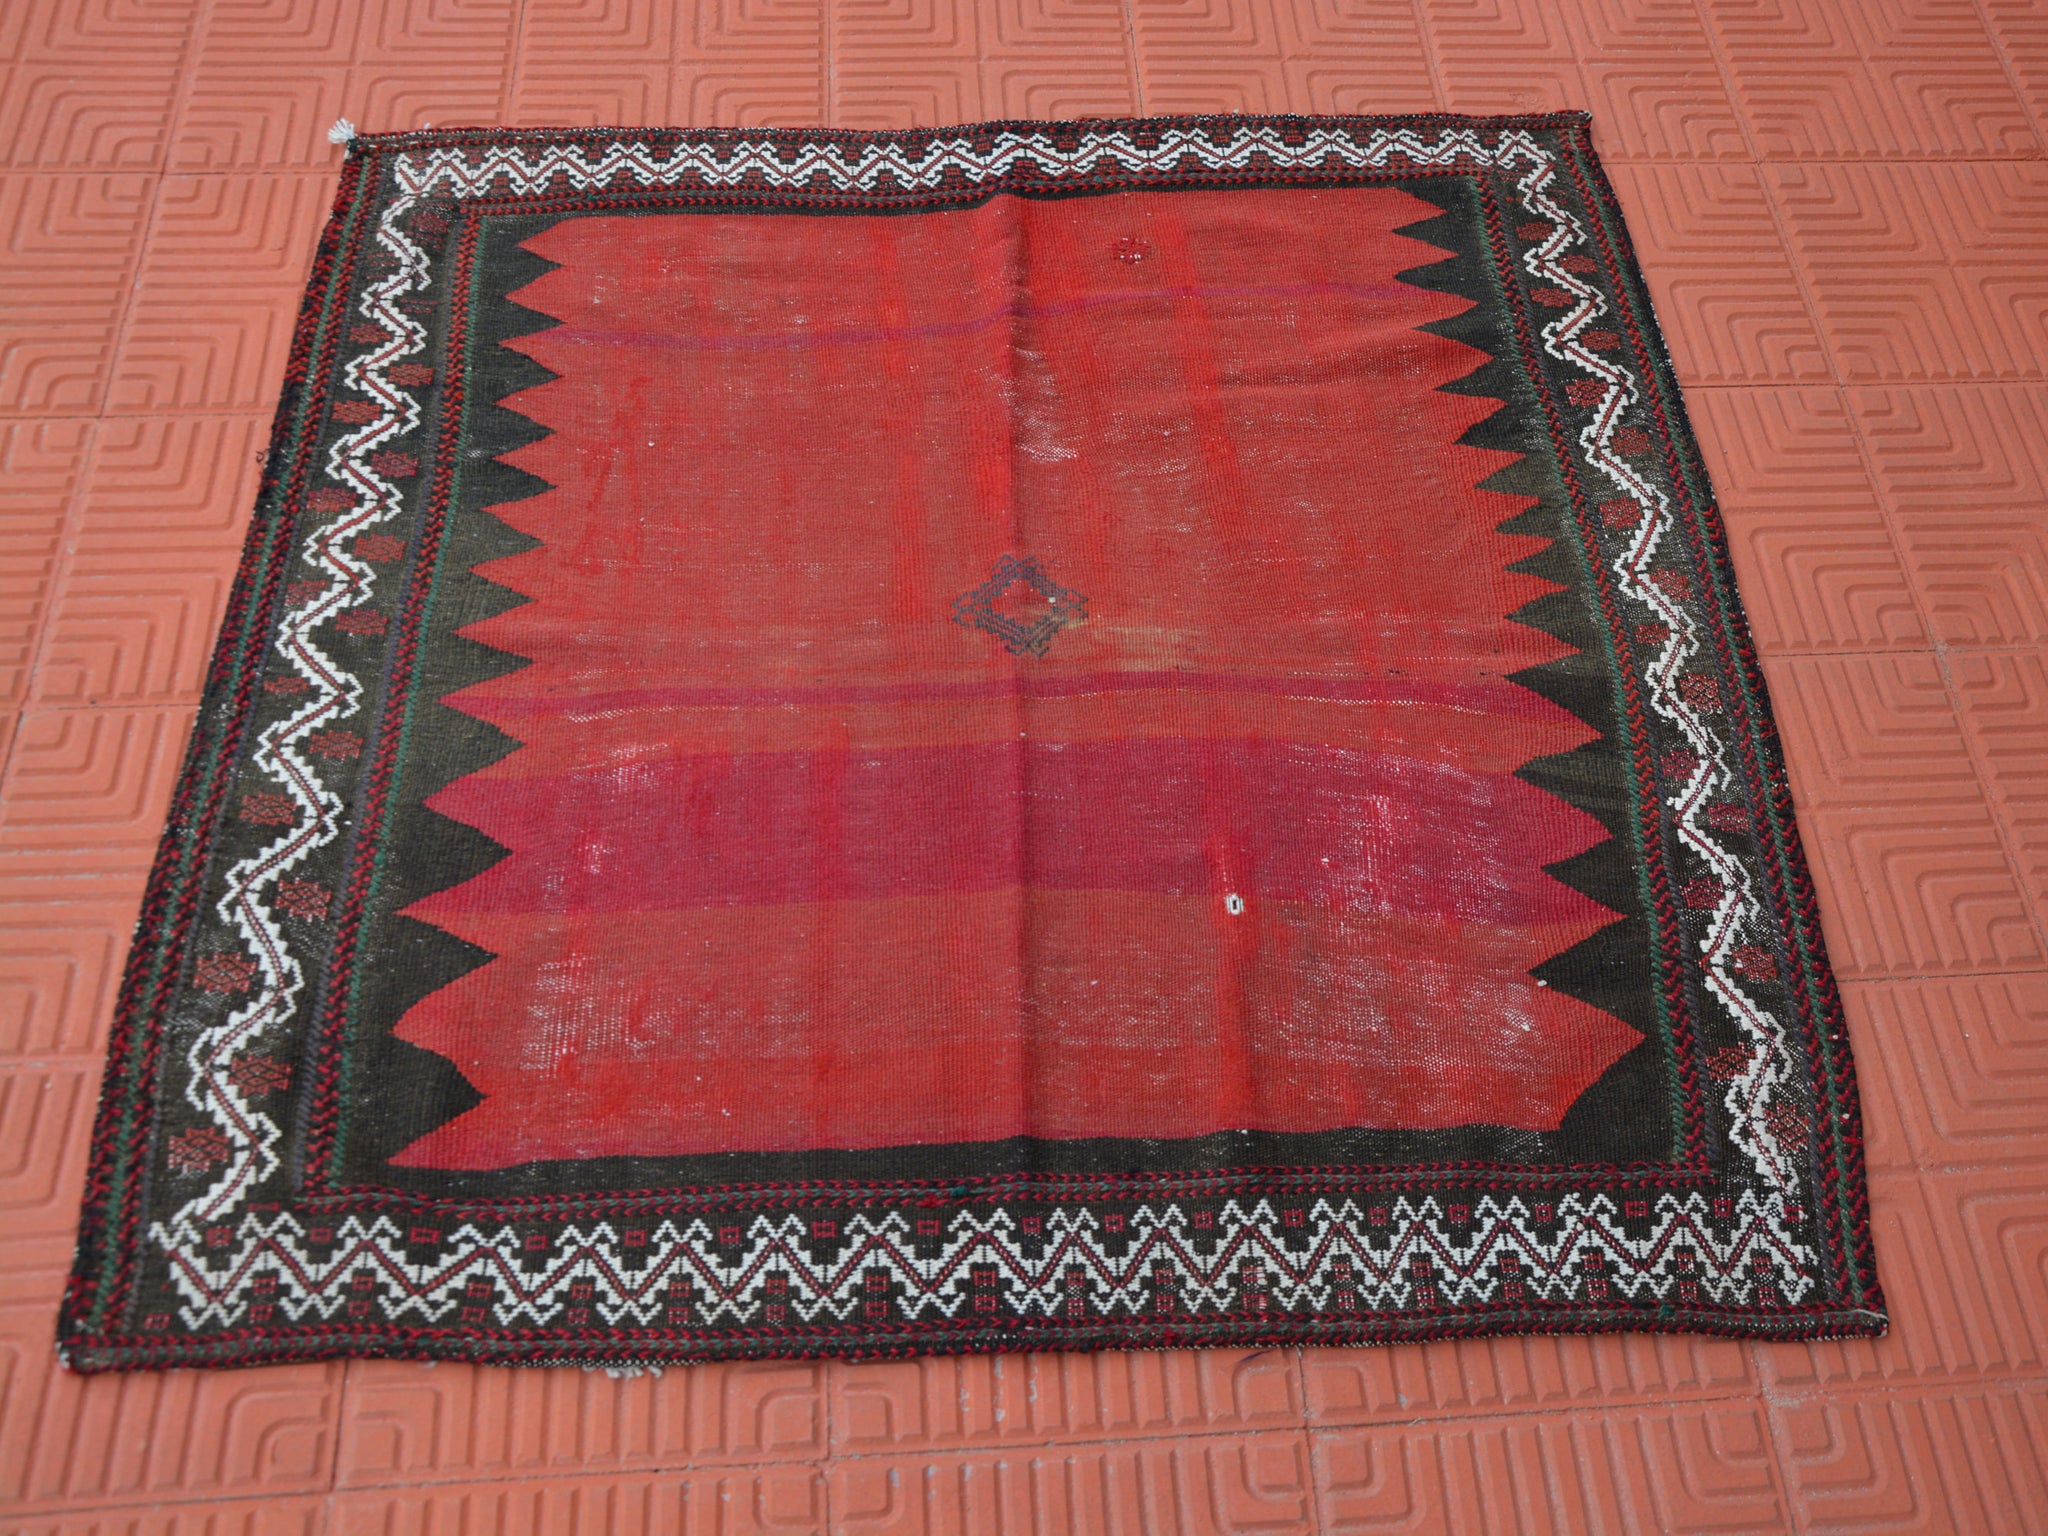 Kilim Rugs 101: Never Buy Before Knowing These – Turk Rugs